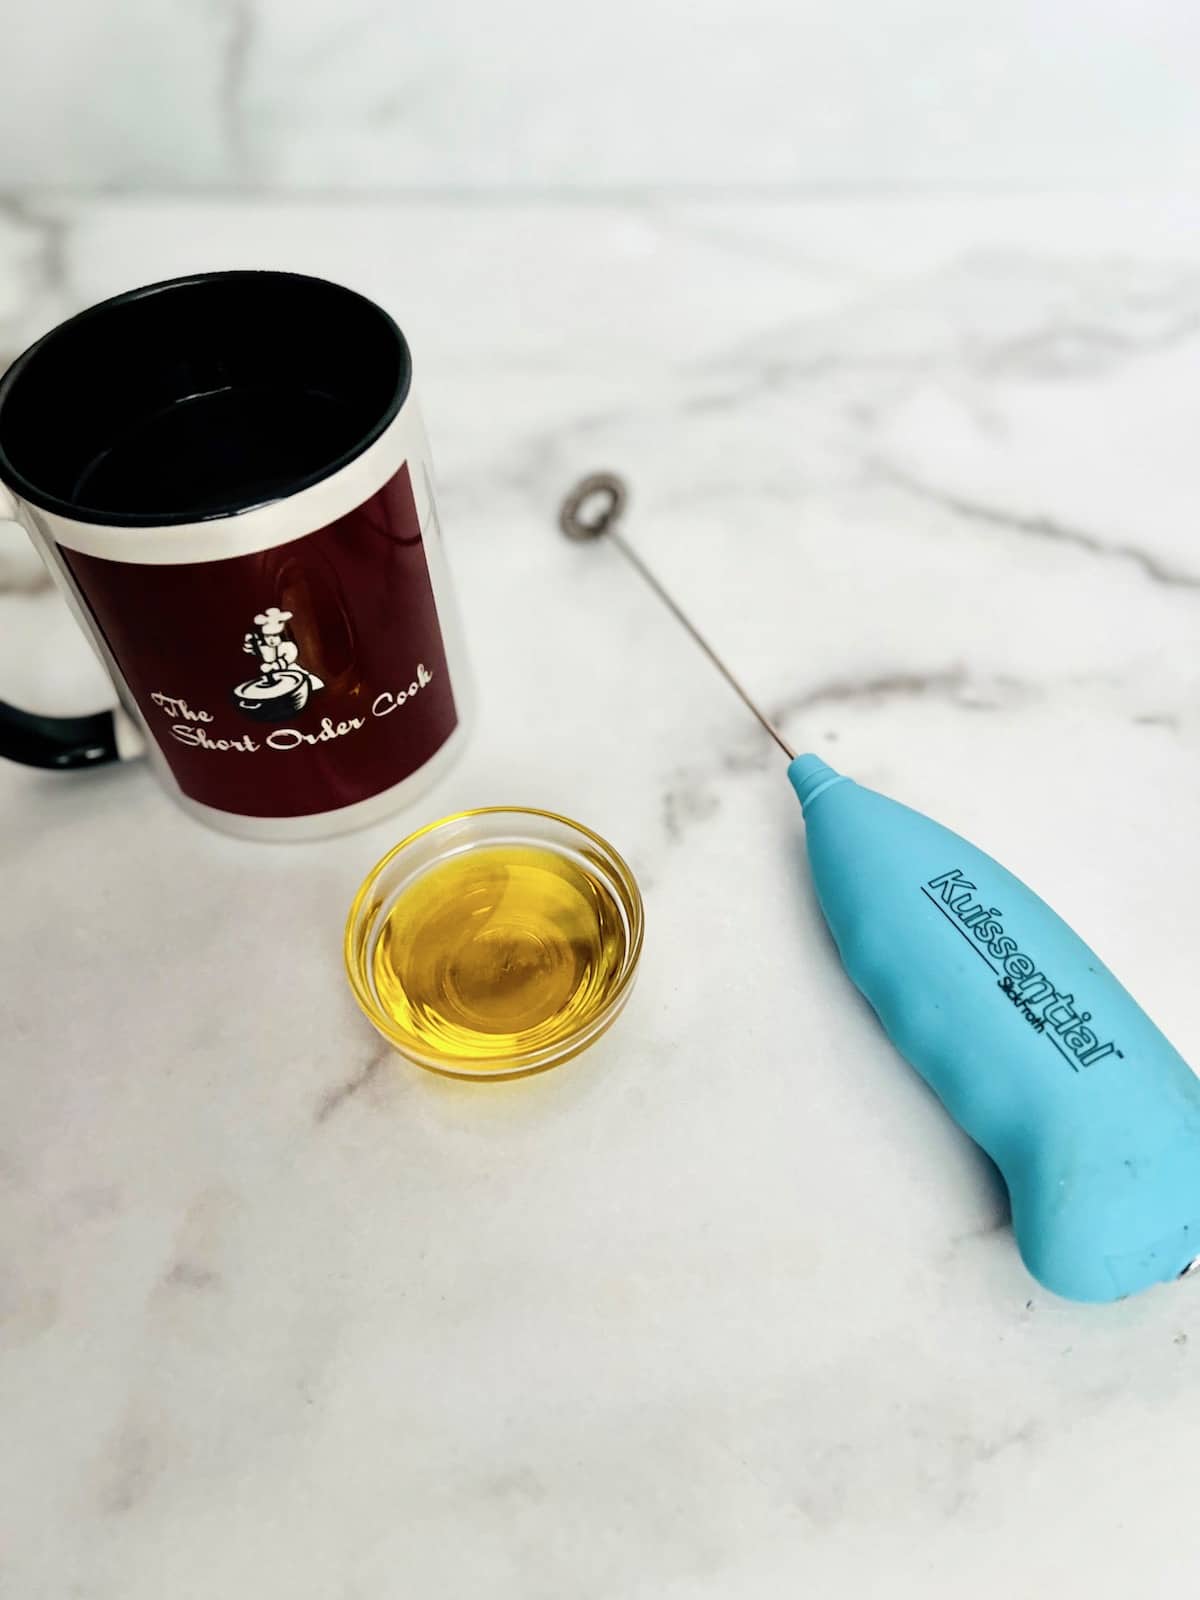 Olive oil and a cup of coffee on the counter alongside a milk frother gadget.